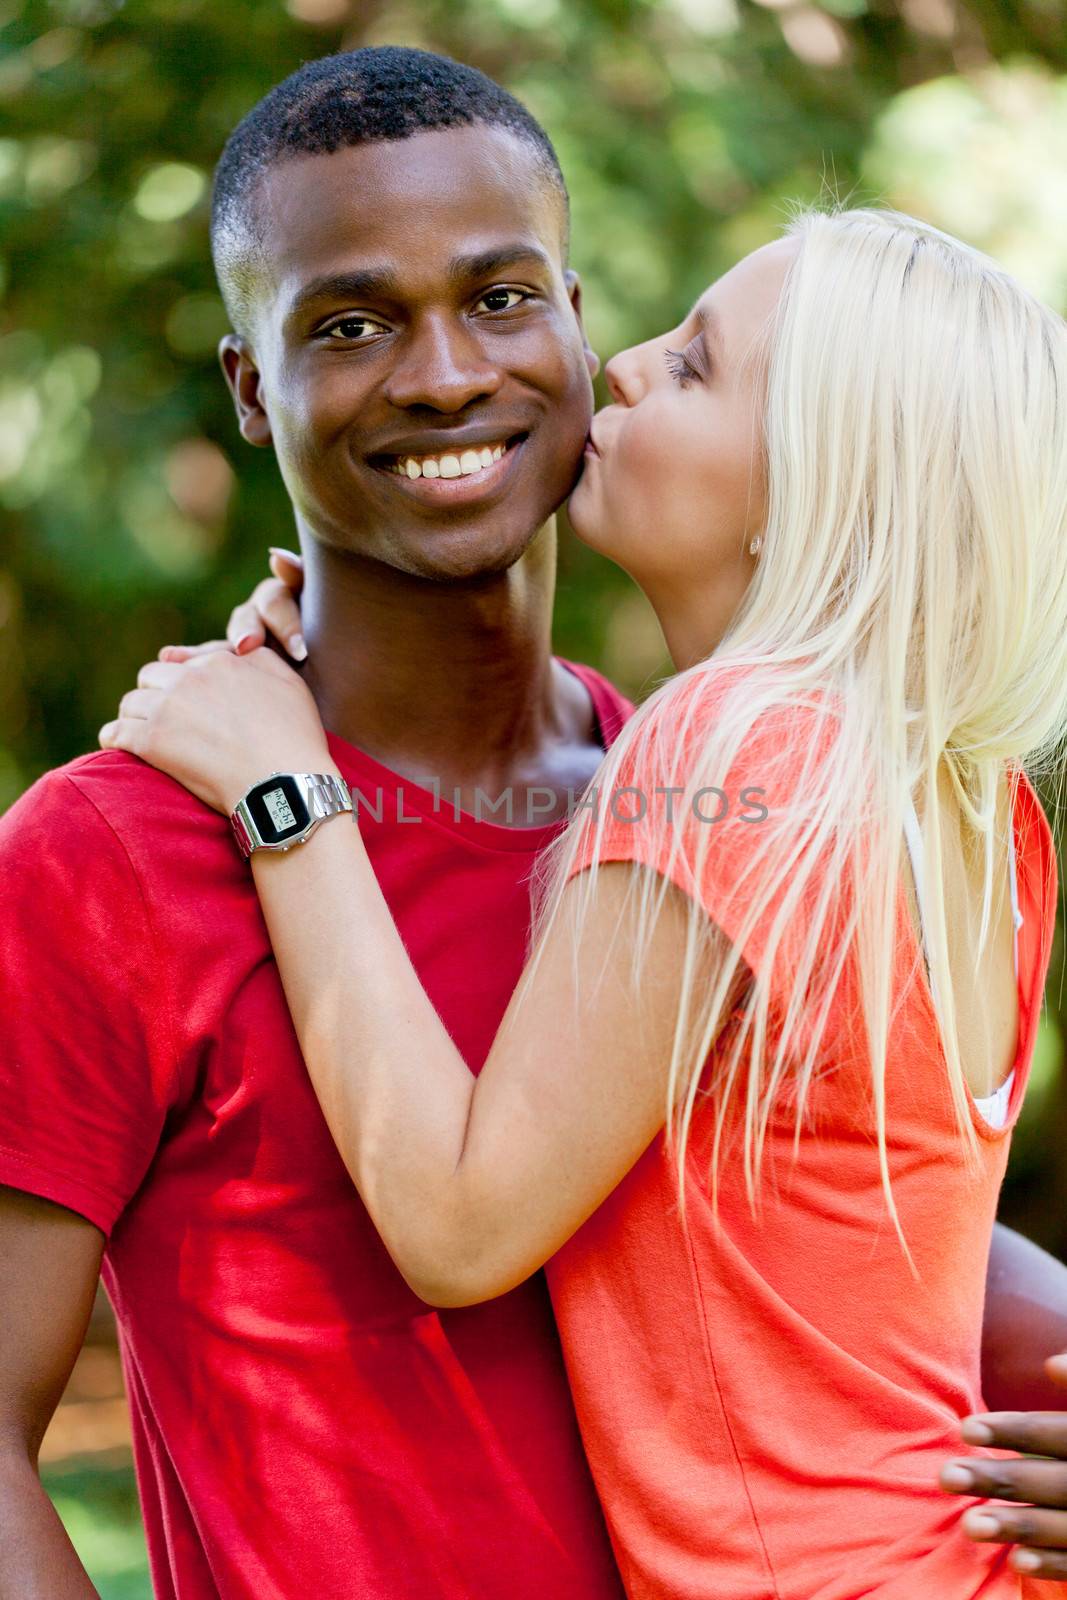 young couple in love summertime fun happiness romance outdoor colorful